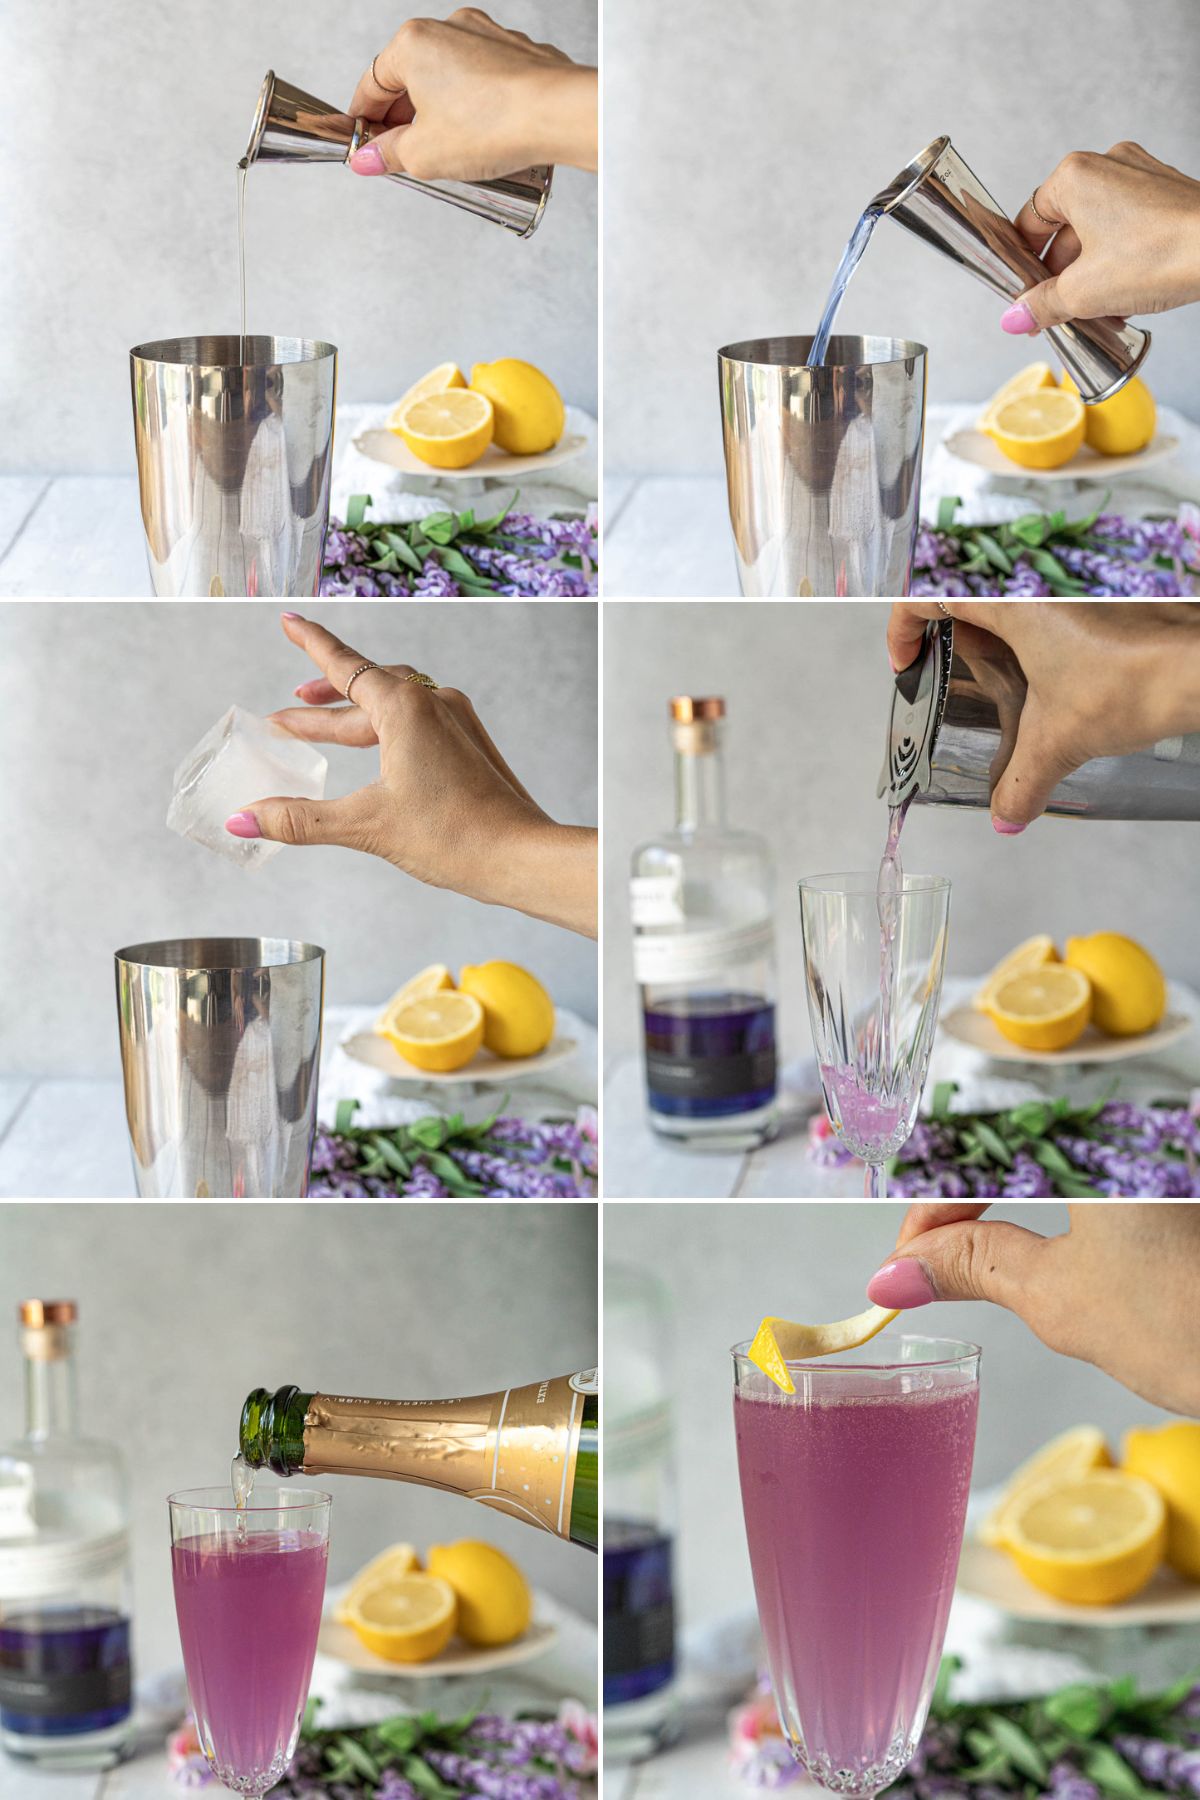 collage of process steps for making a French 75 cocktail – add simple syrup, add gin, add ice, strain into a glass, top with champagne, and garnish with a lemon twist